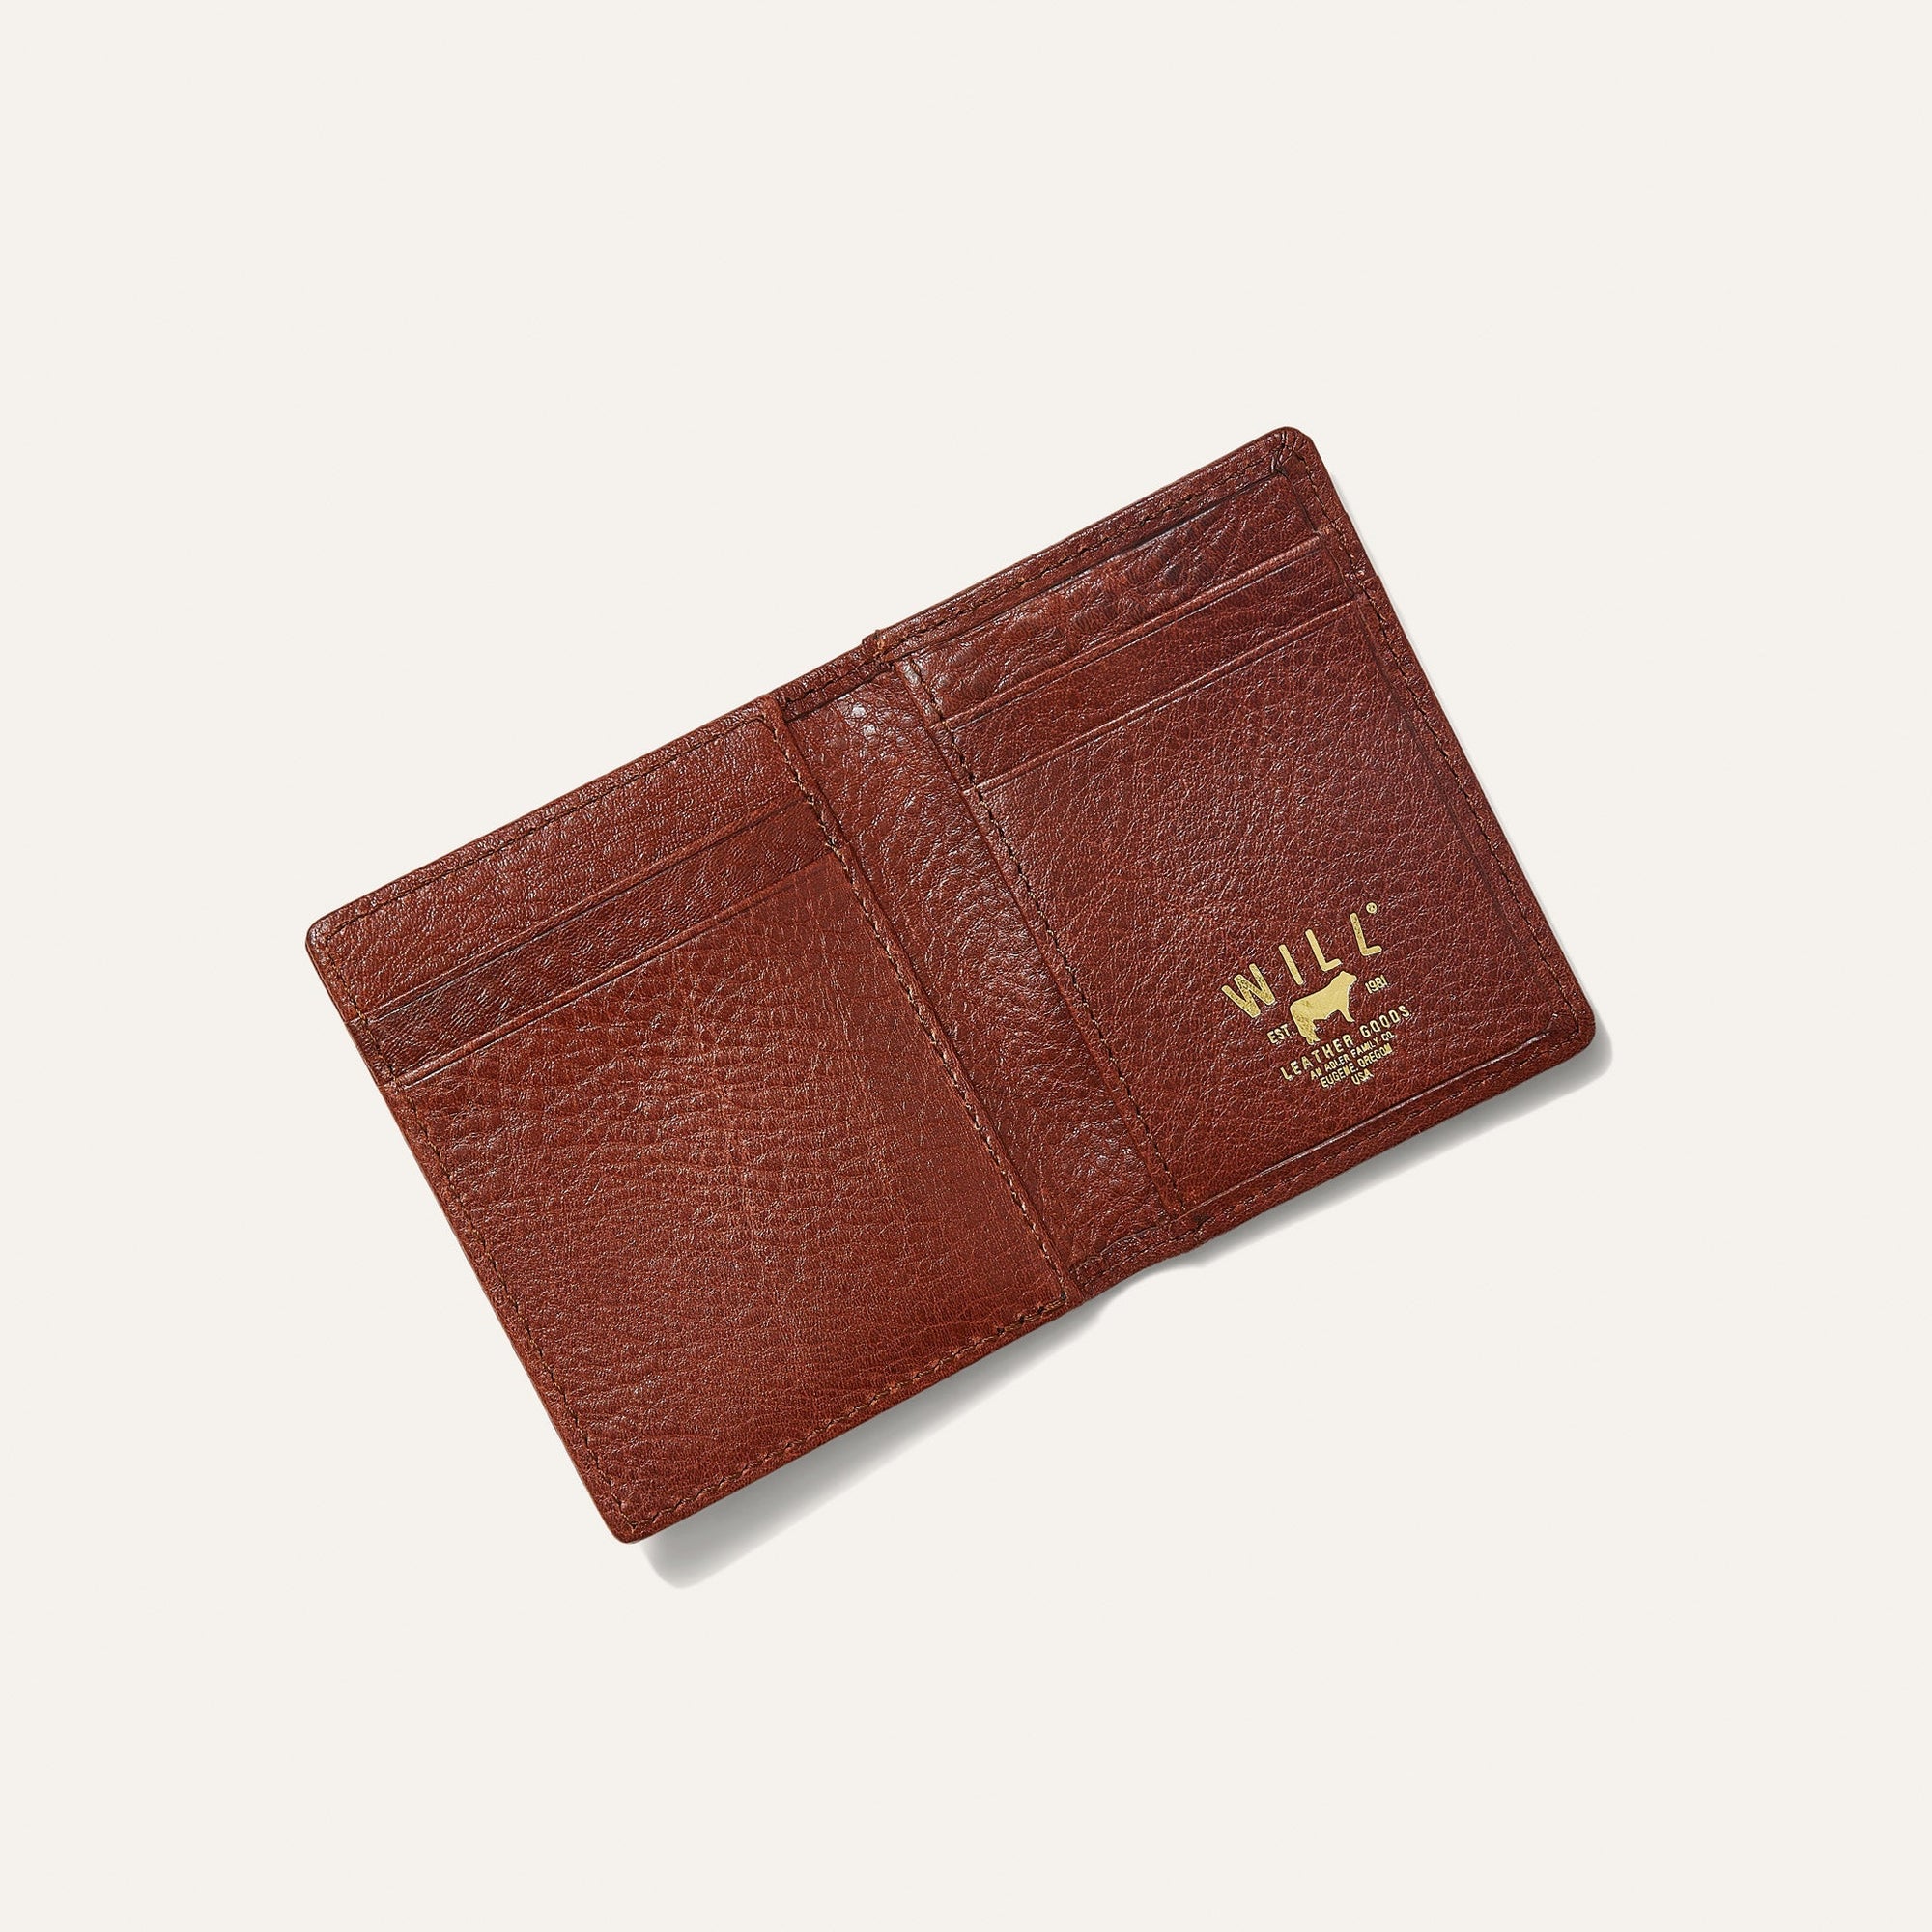 Classic Leather Money Clip Wallet in Cognac by Will Leather Goods